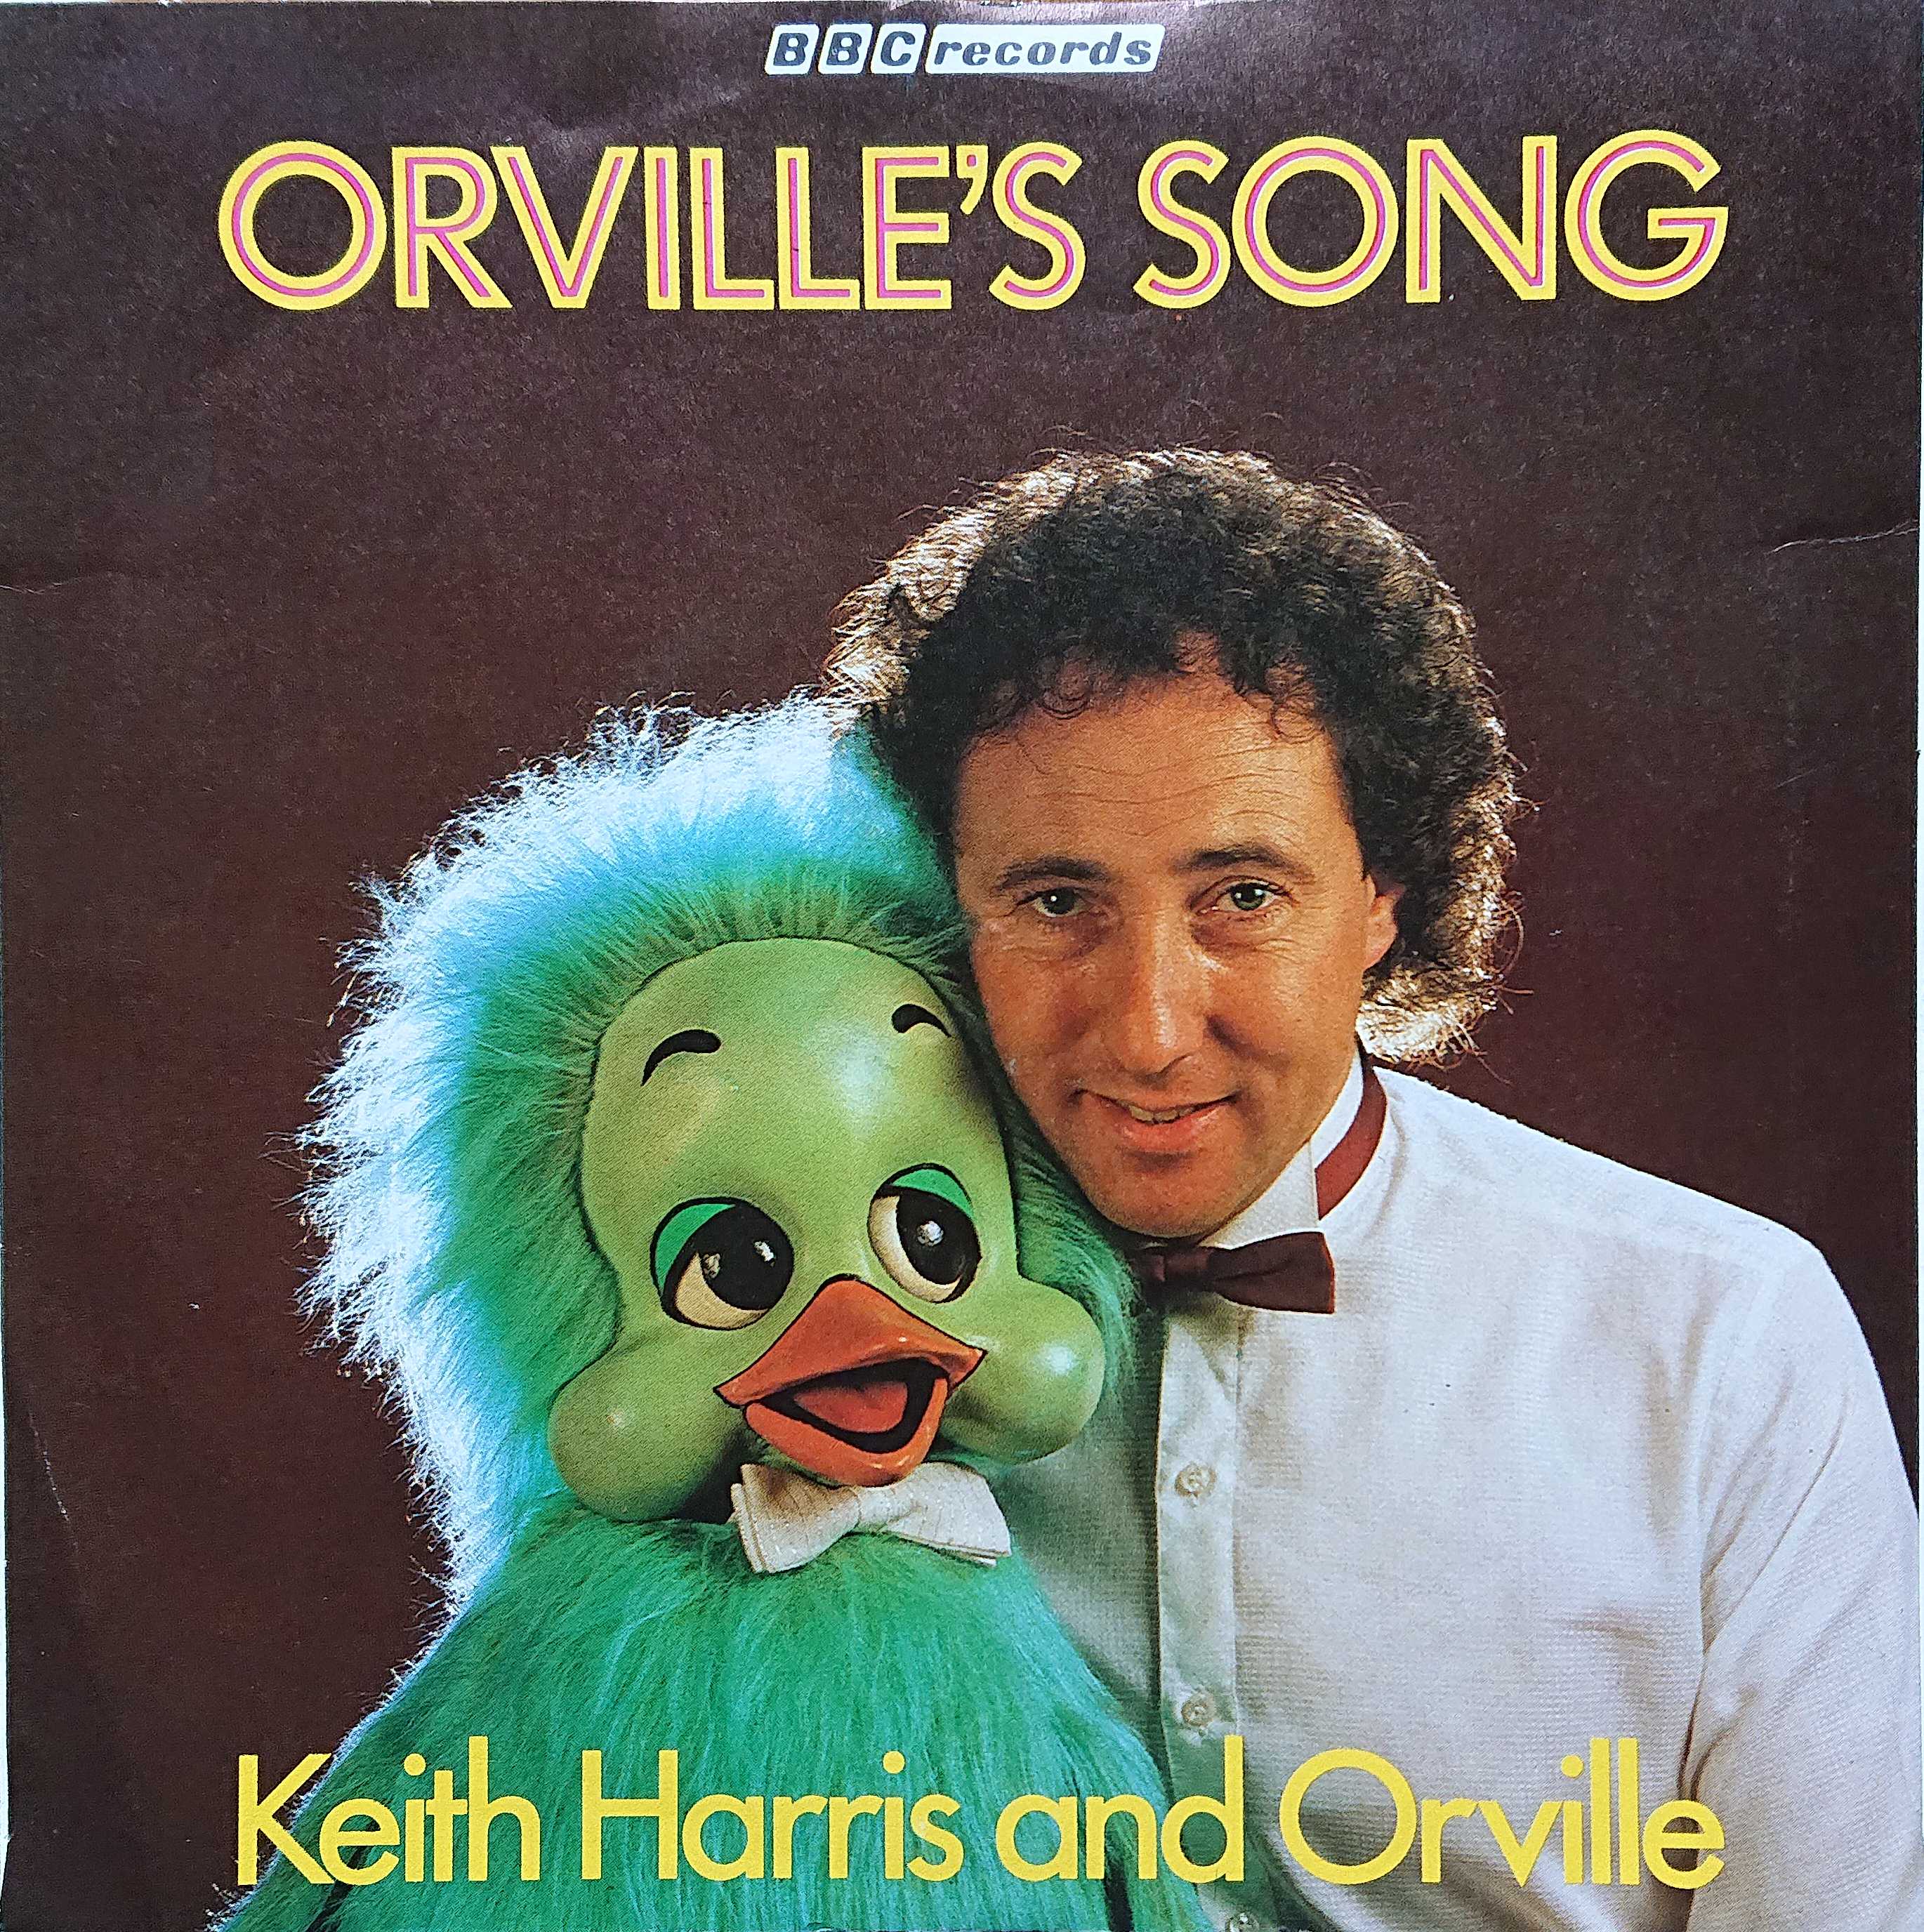 Picture of Orville's song by artist Keith Harris and Orville from the BBC singles - Records and Tapes library